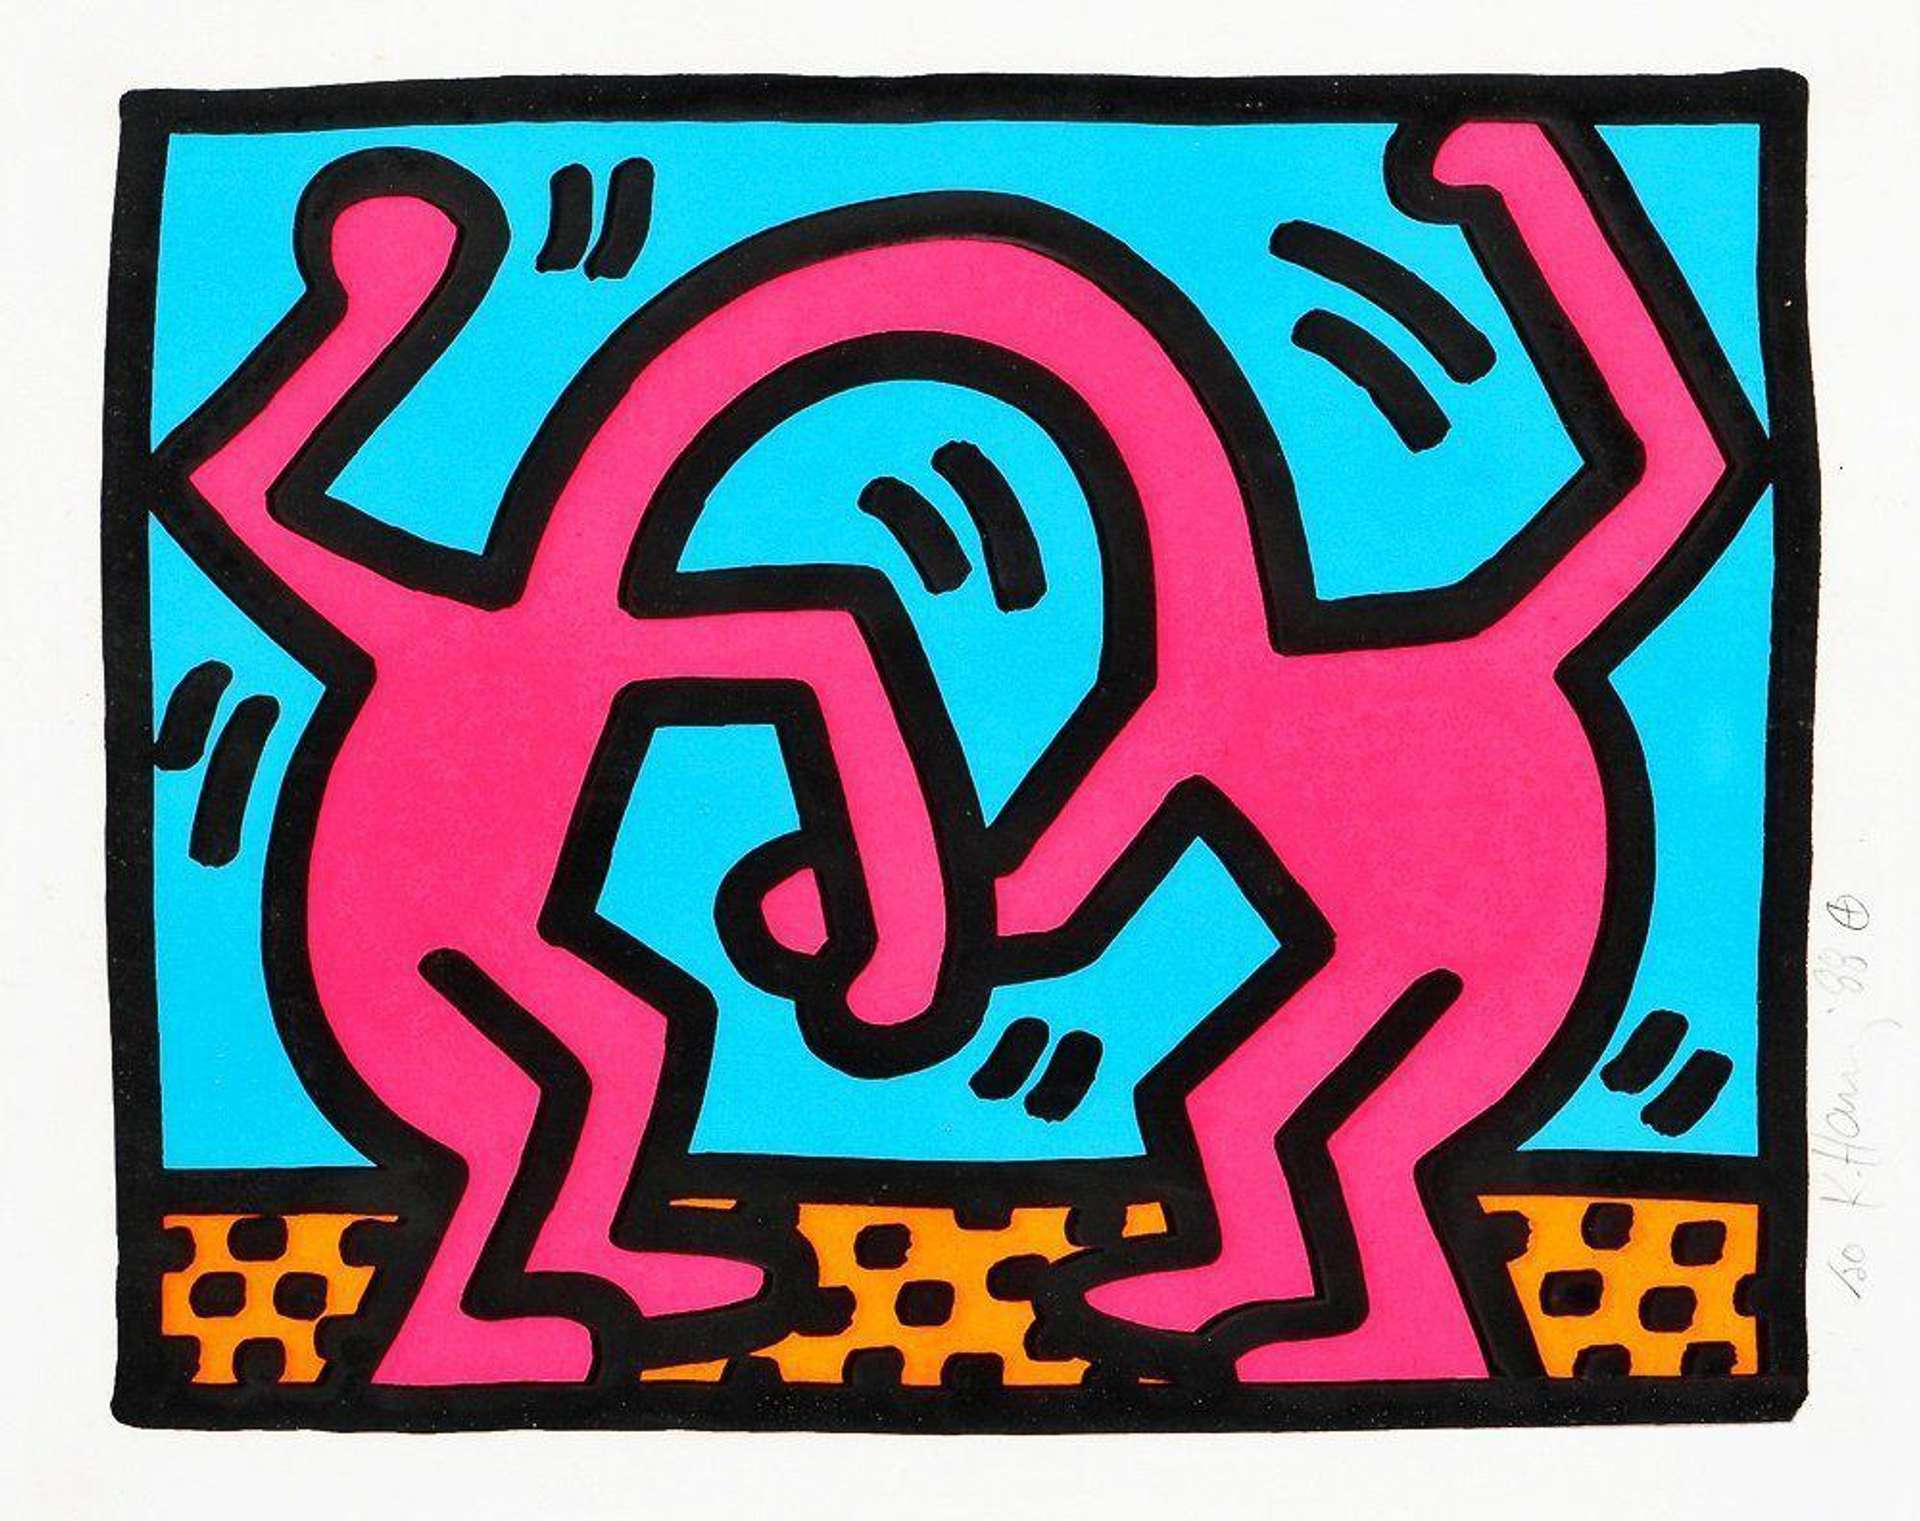 Pop Art image of two neon pink figures connected in movement on a yellow paved ground and blue background